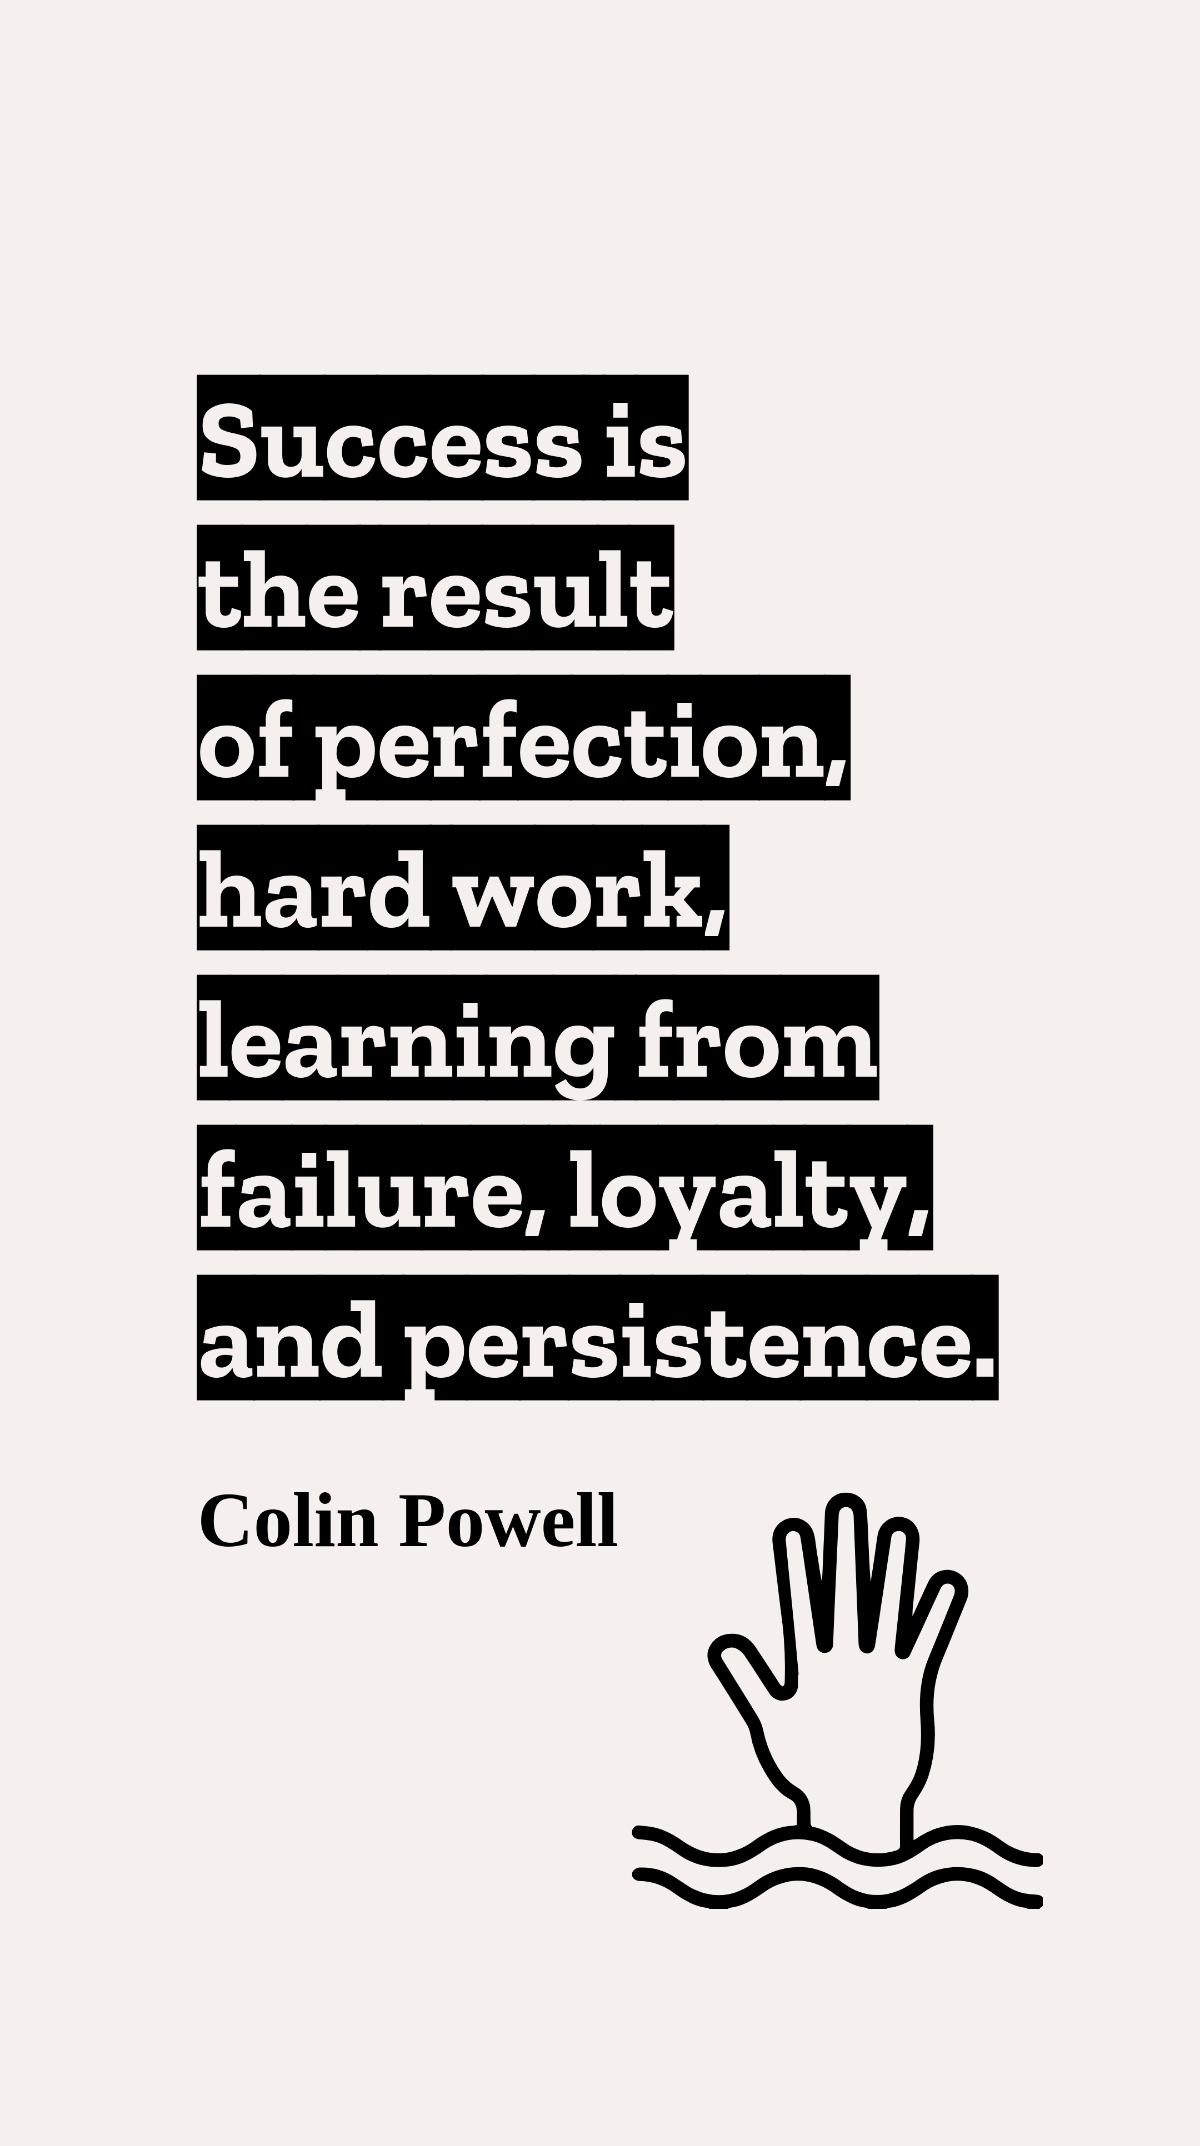 Free Colin Powell - Success is the result of perfection, hard work, learning from failure, loyalty, and persistence. Template